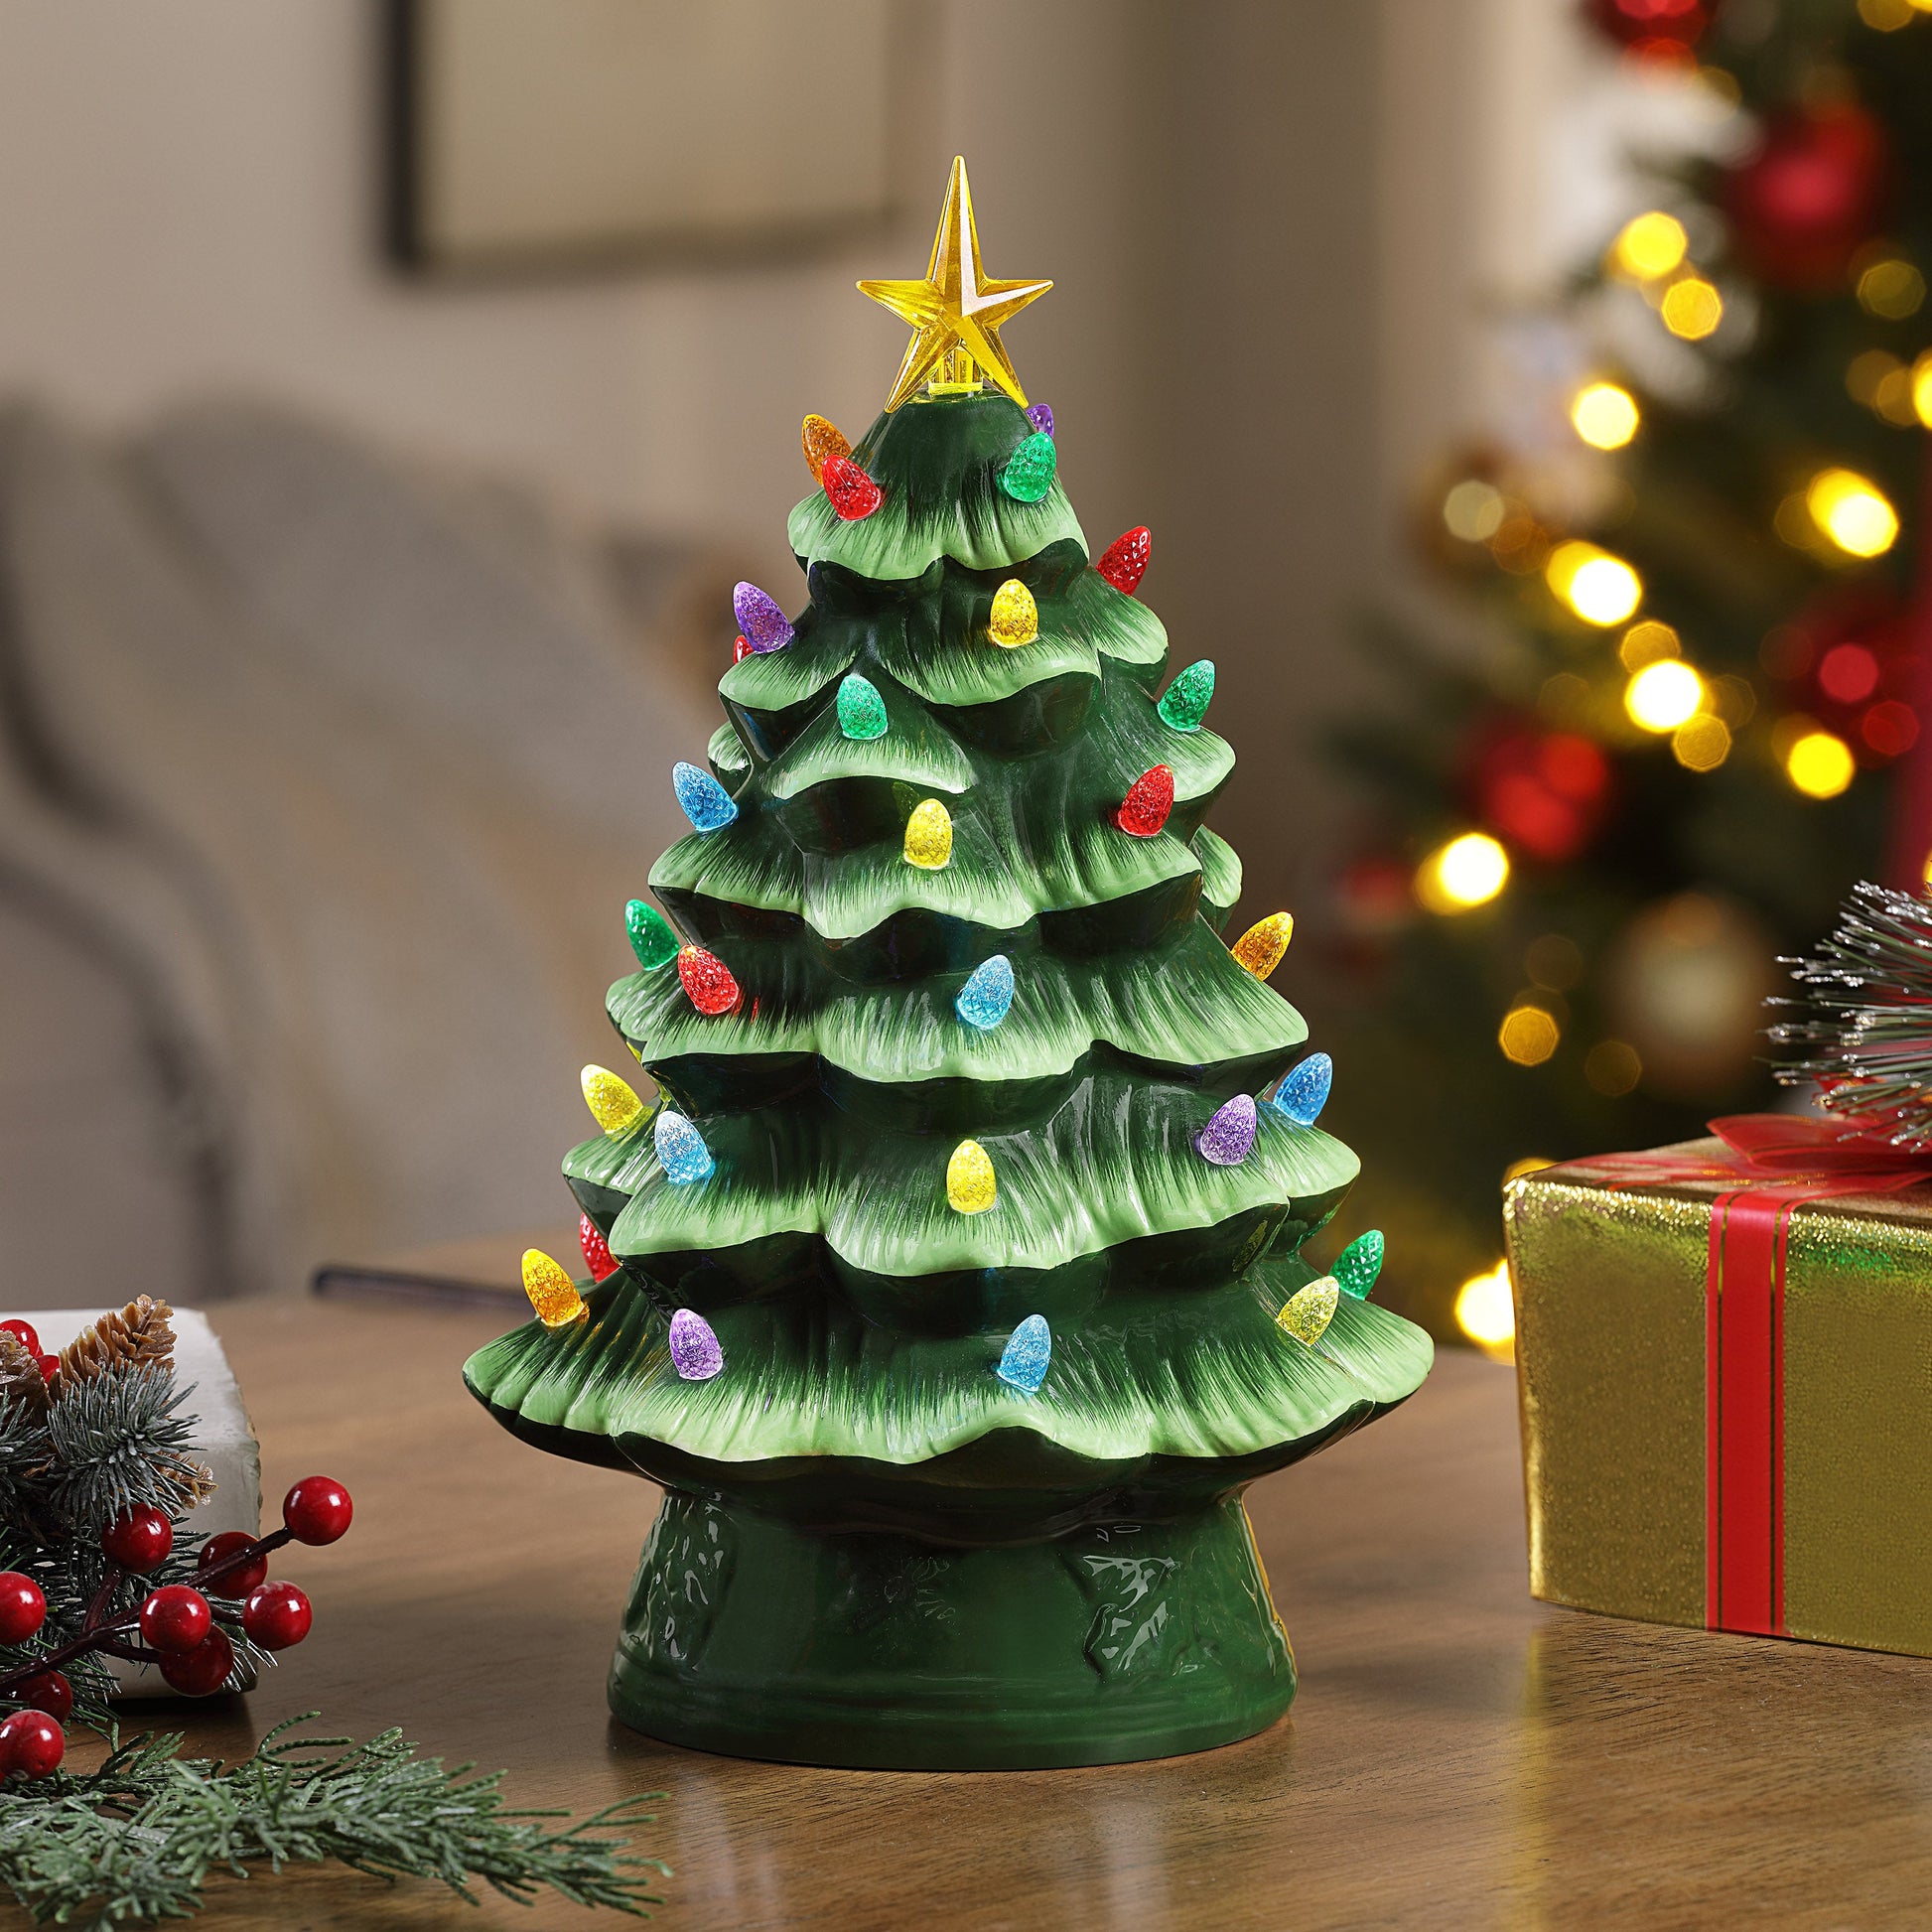 HOLIDAY PEAK Battery-Operated Vintage-Style Ceramic Christmas Tree,  Nostalgic Holiday Décor, Green, 13 High